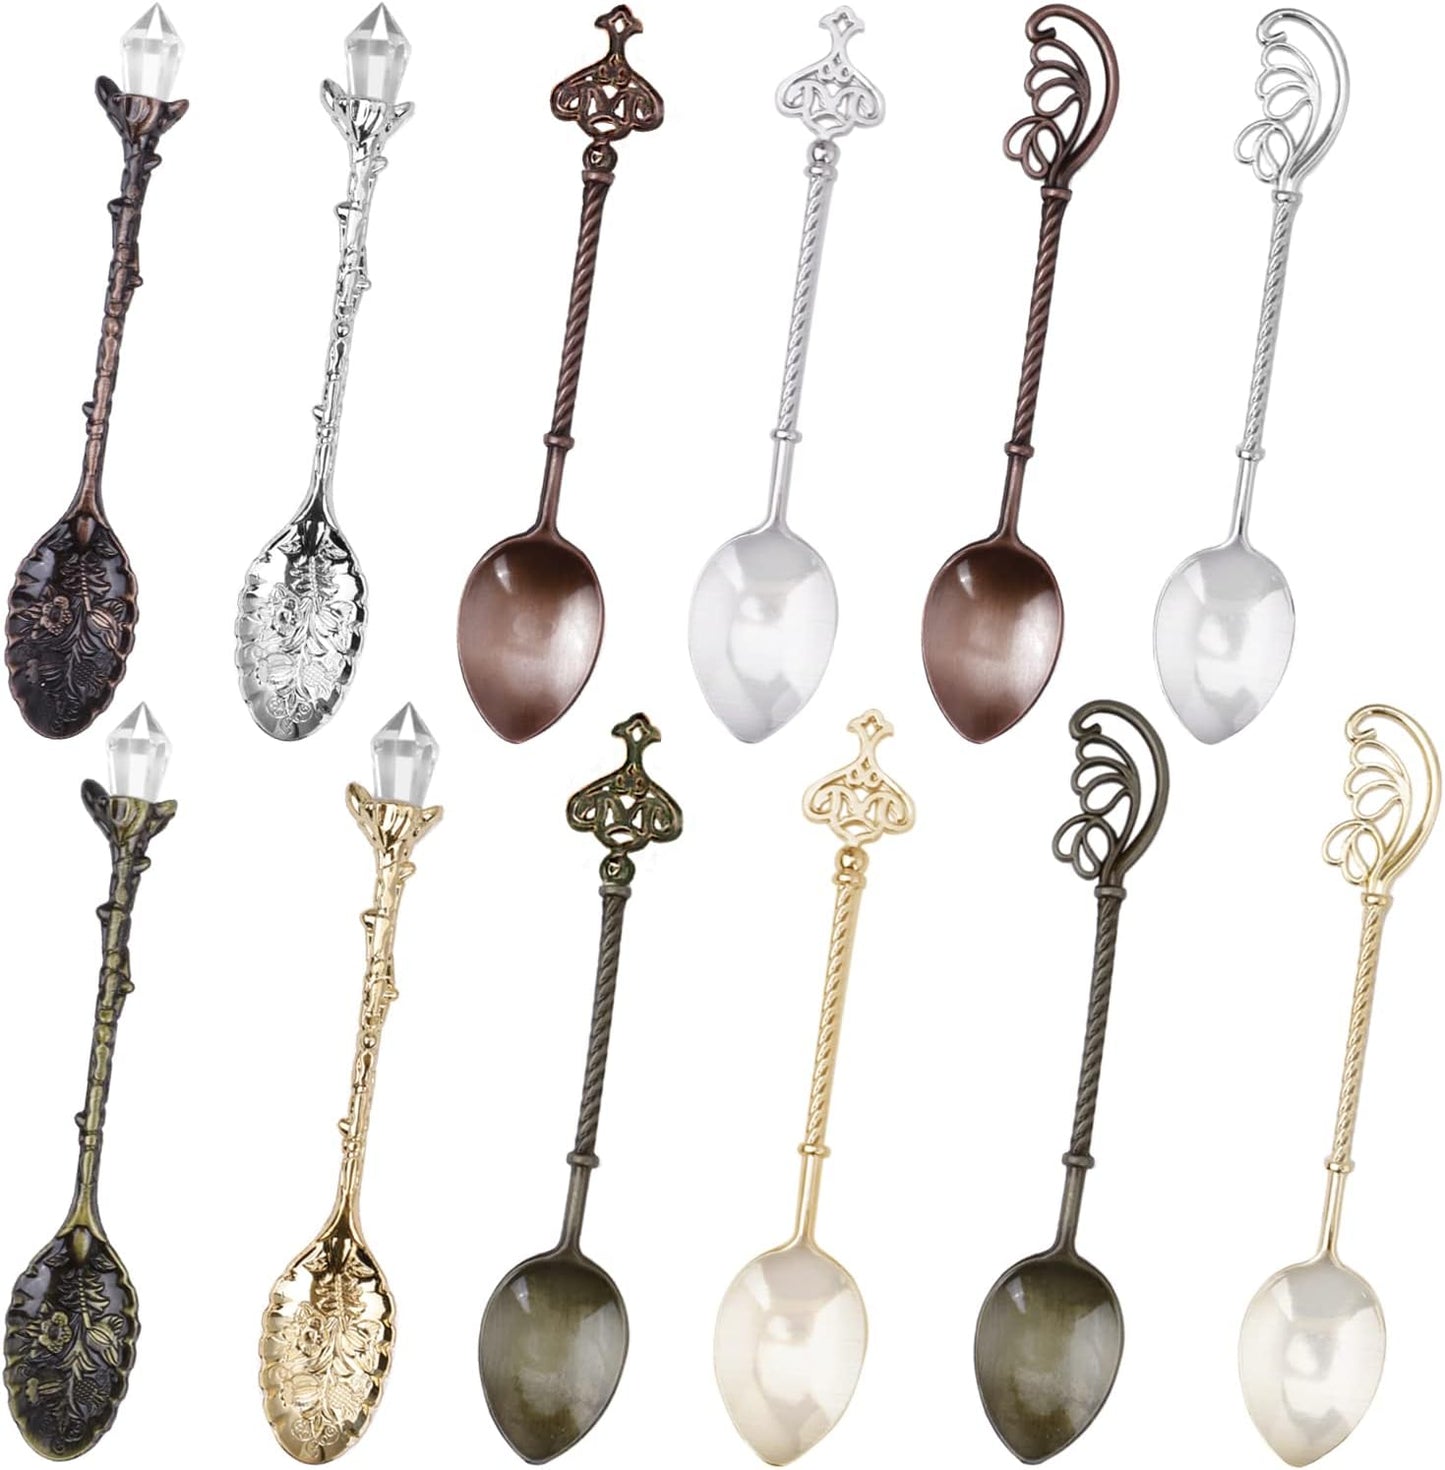 Spellwork Spoon - Lucky Dip a beautiful little spoon perfect for spellwork and altar decoration